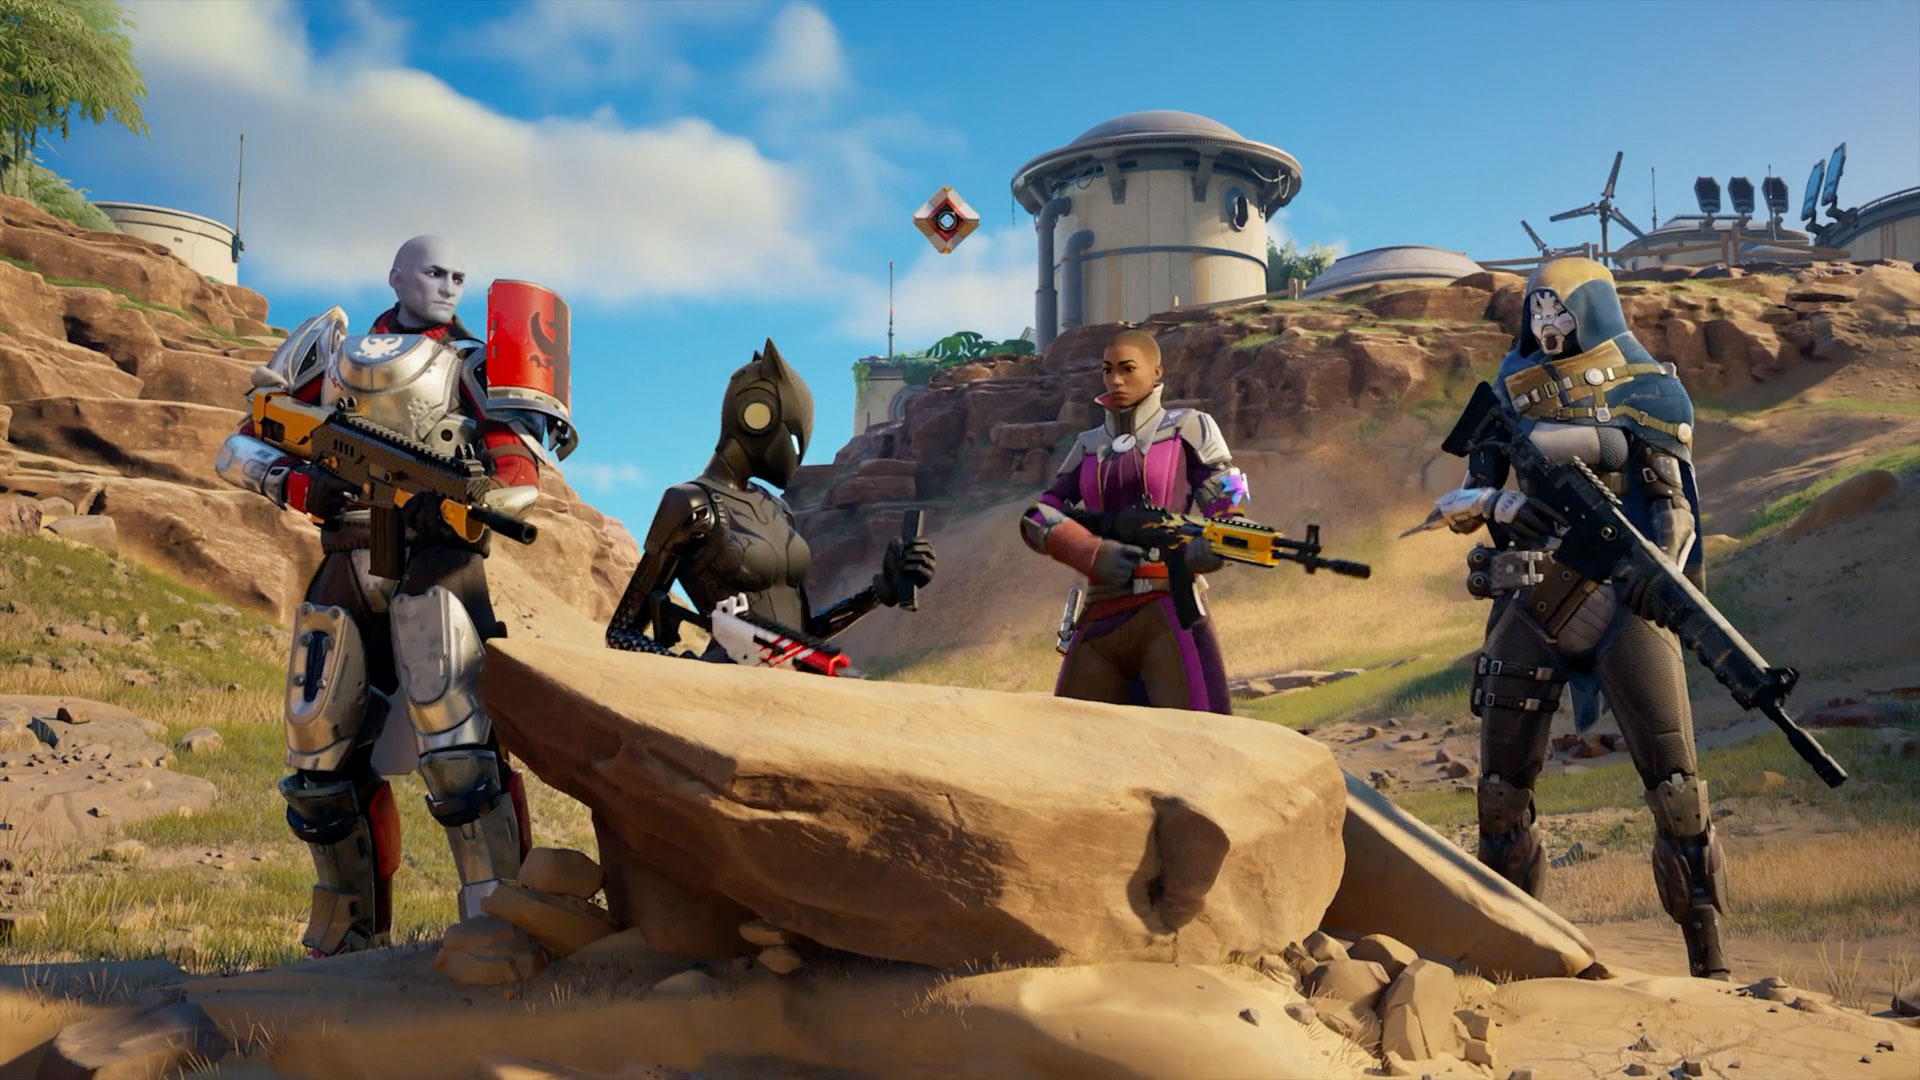 Destiny in Fortnite and everything you need to know about it | GamesRadar+